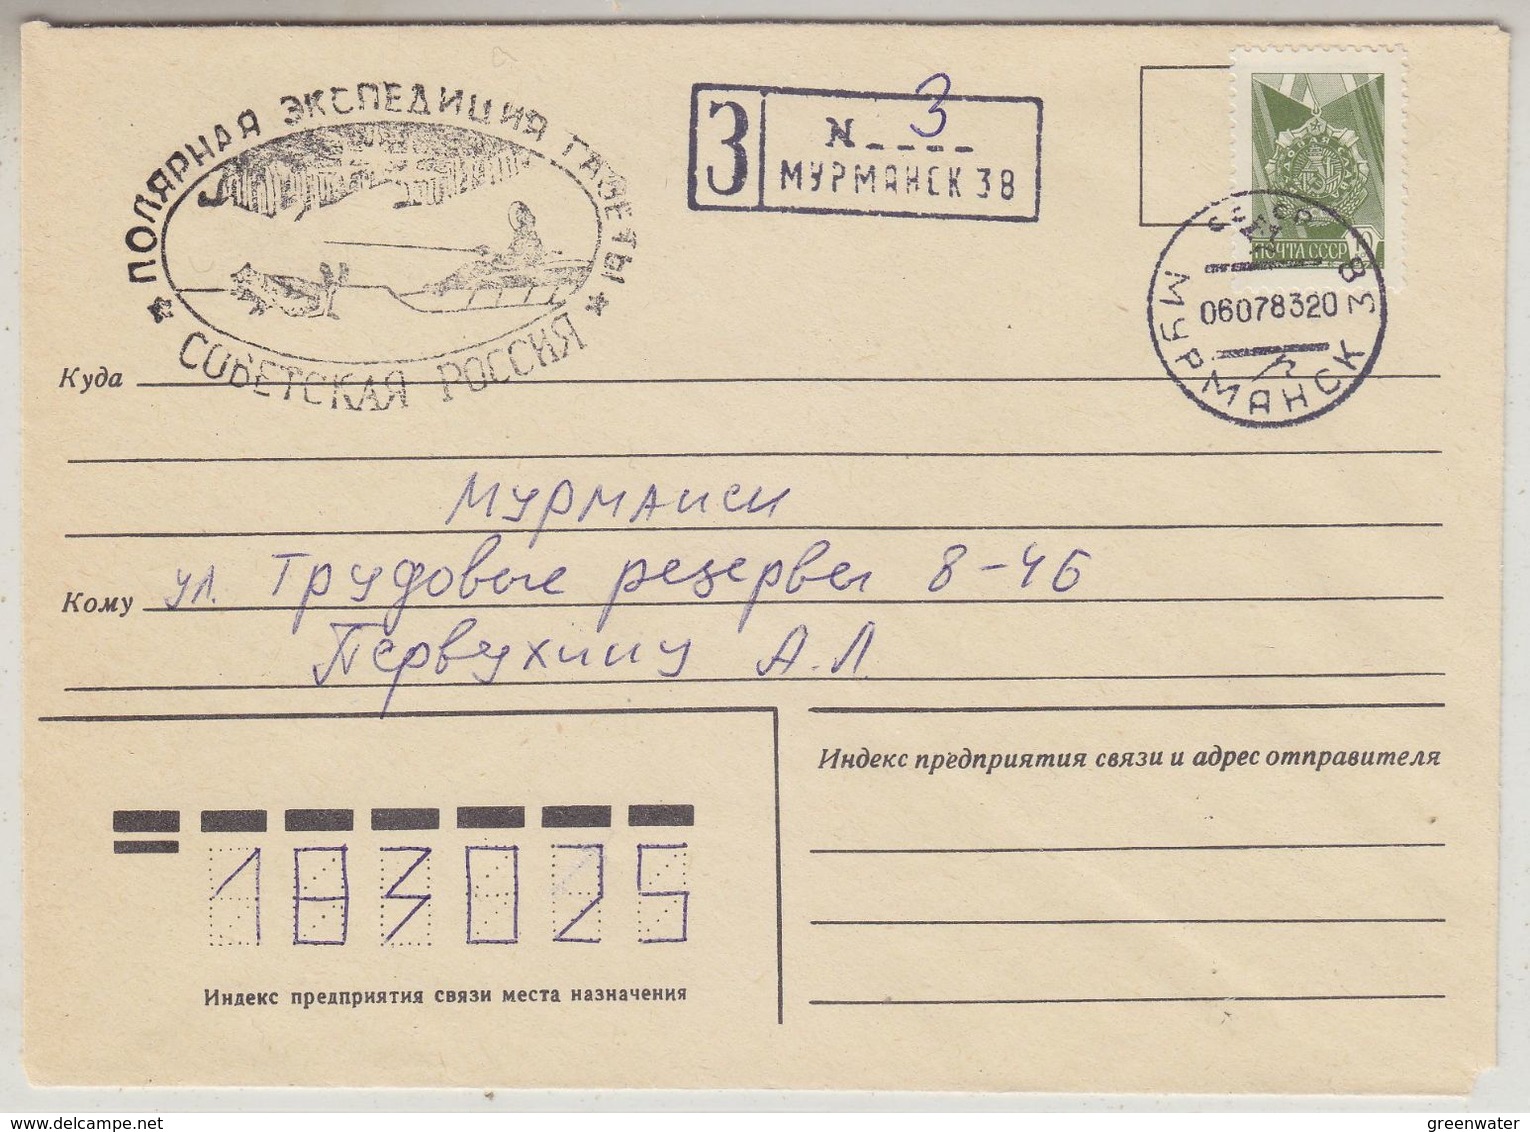 Russia 1978 Sled + Dogs Ca Murmansk 06 07 83 Cover (37675) - Andere Verkehrsträger